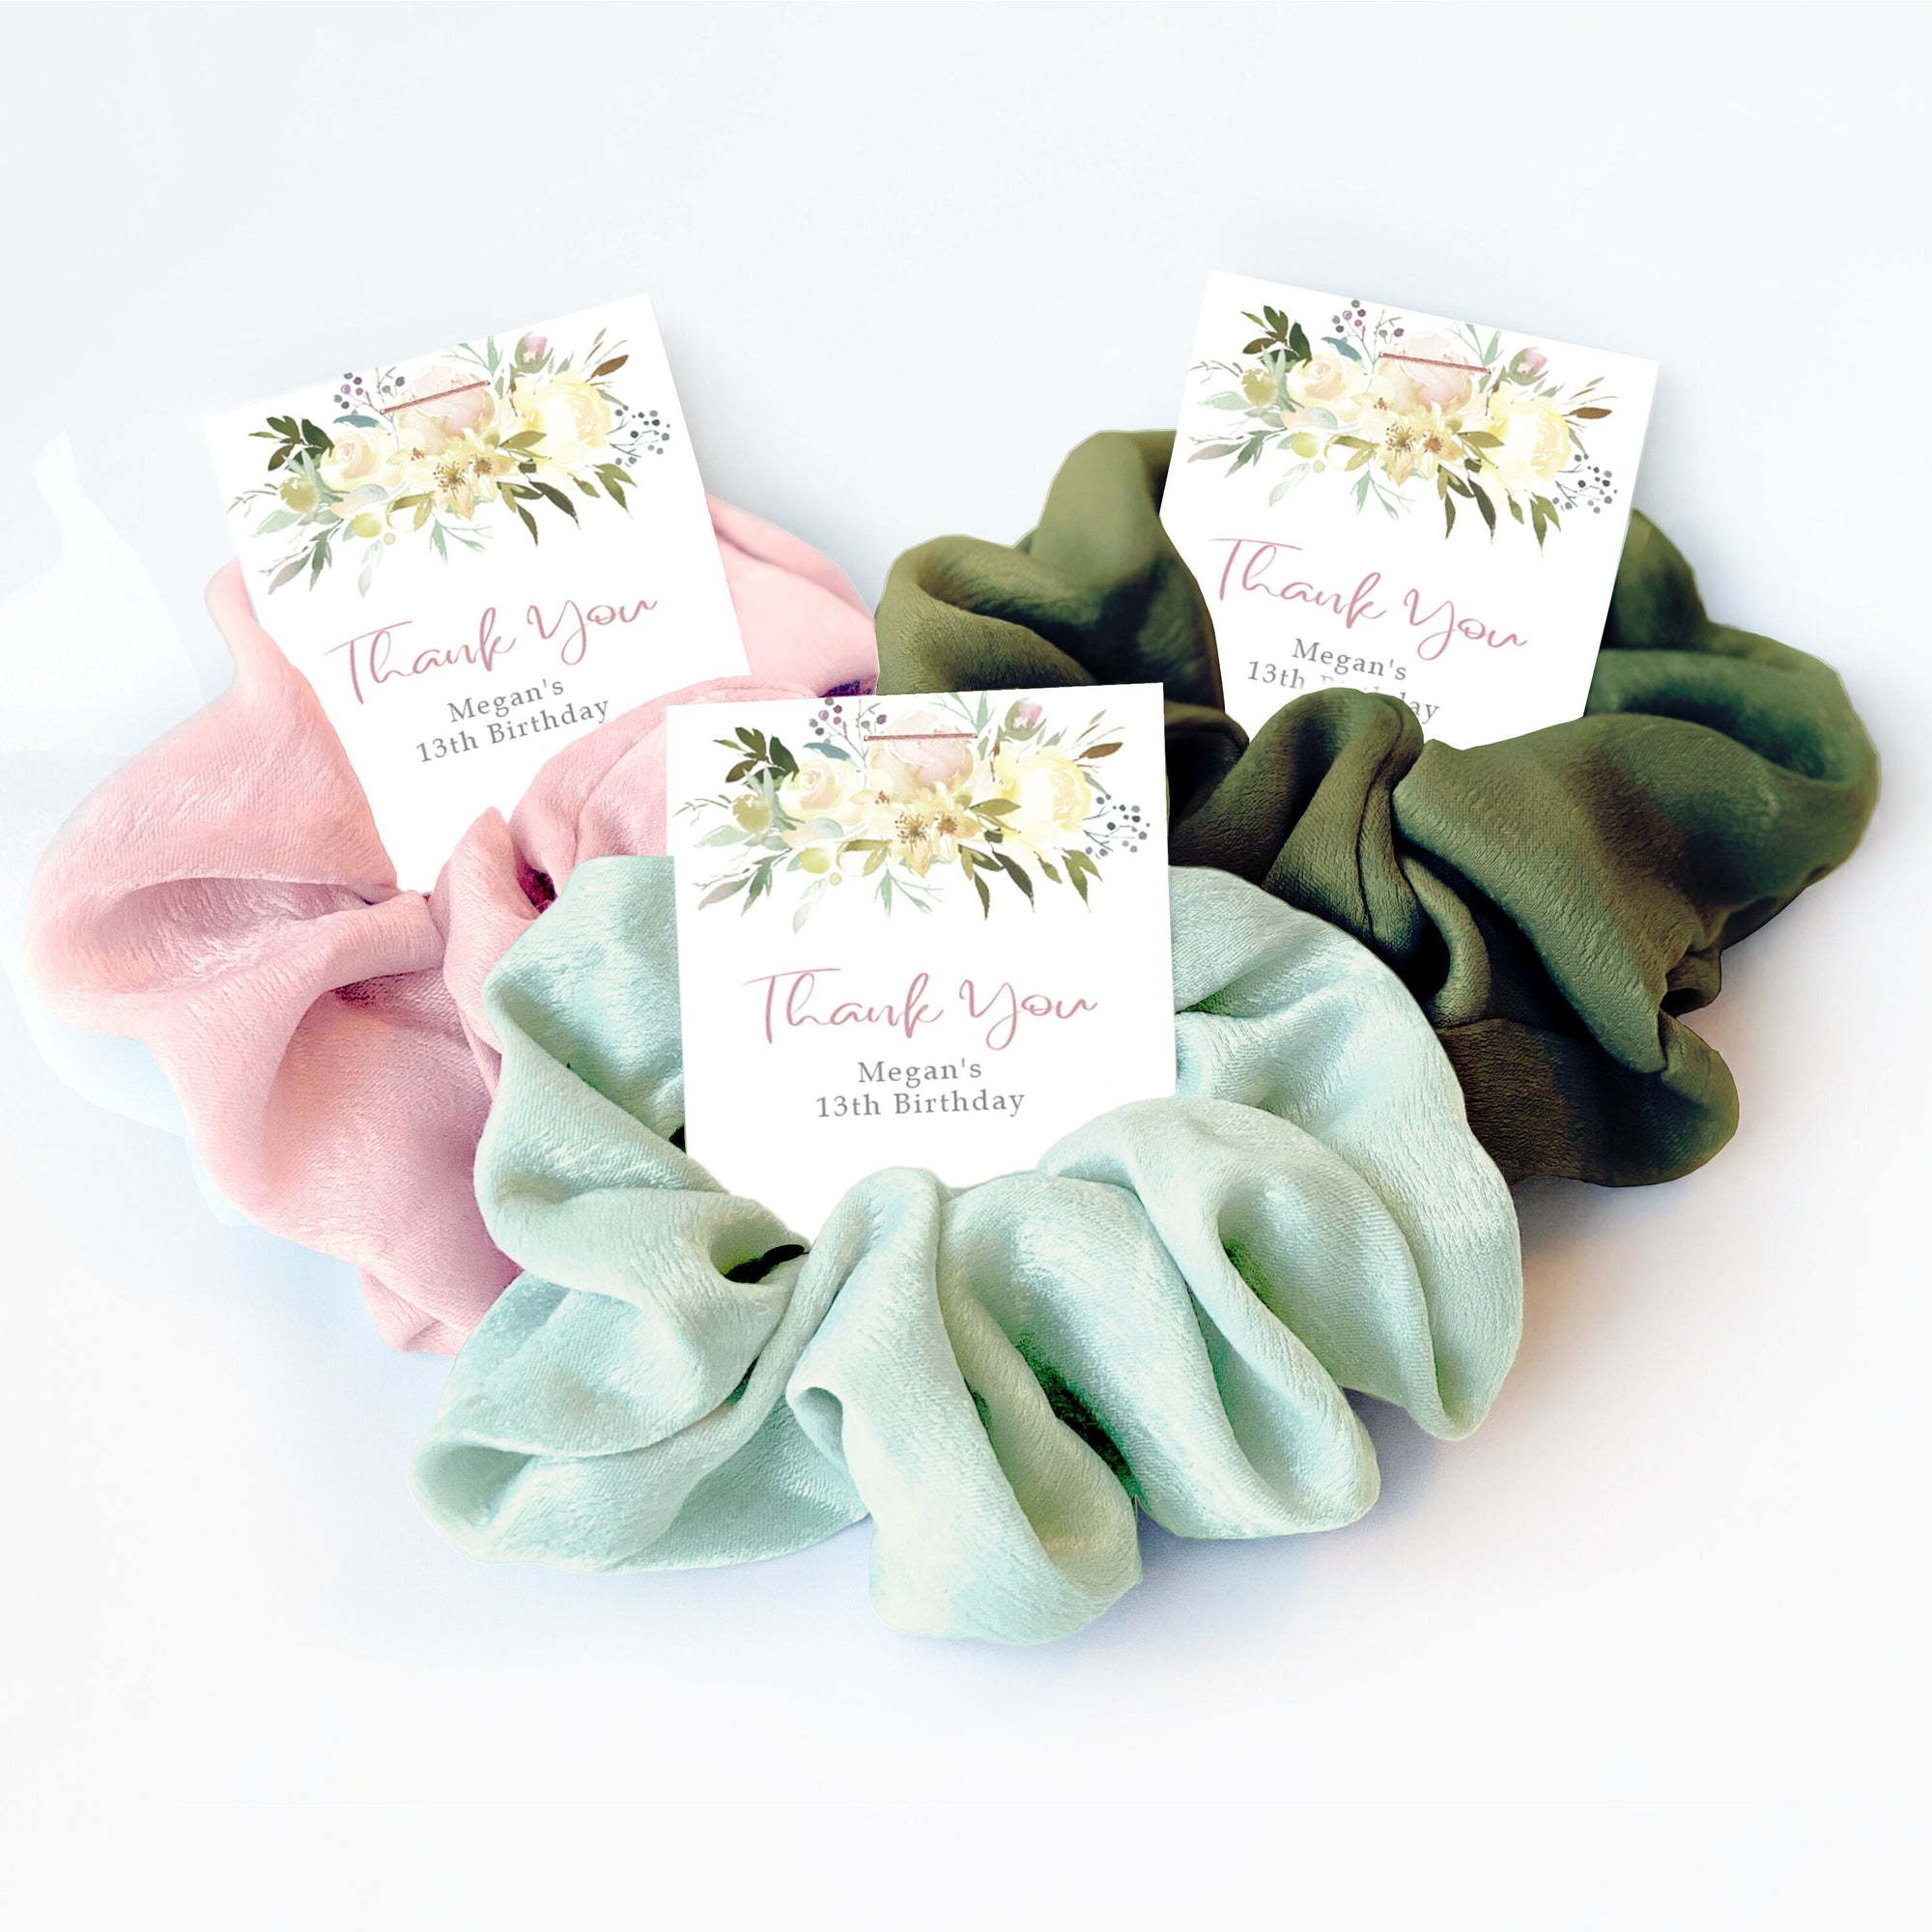 Hair Scrunchie Party Favors, Birthday Party Favors for Girls, 13th Birthday Favors, Blush Pastel Floral Birthday Thank You Gifts for Guests